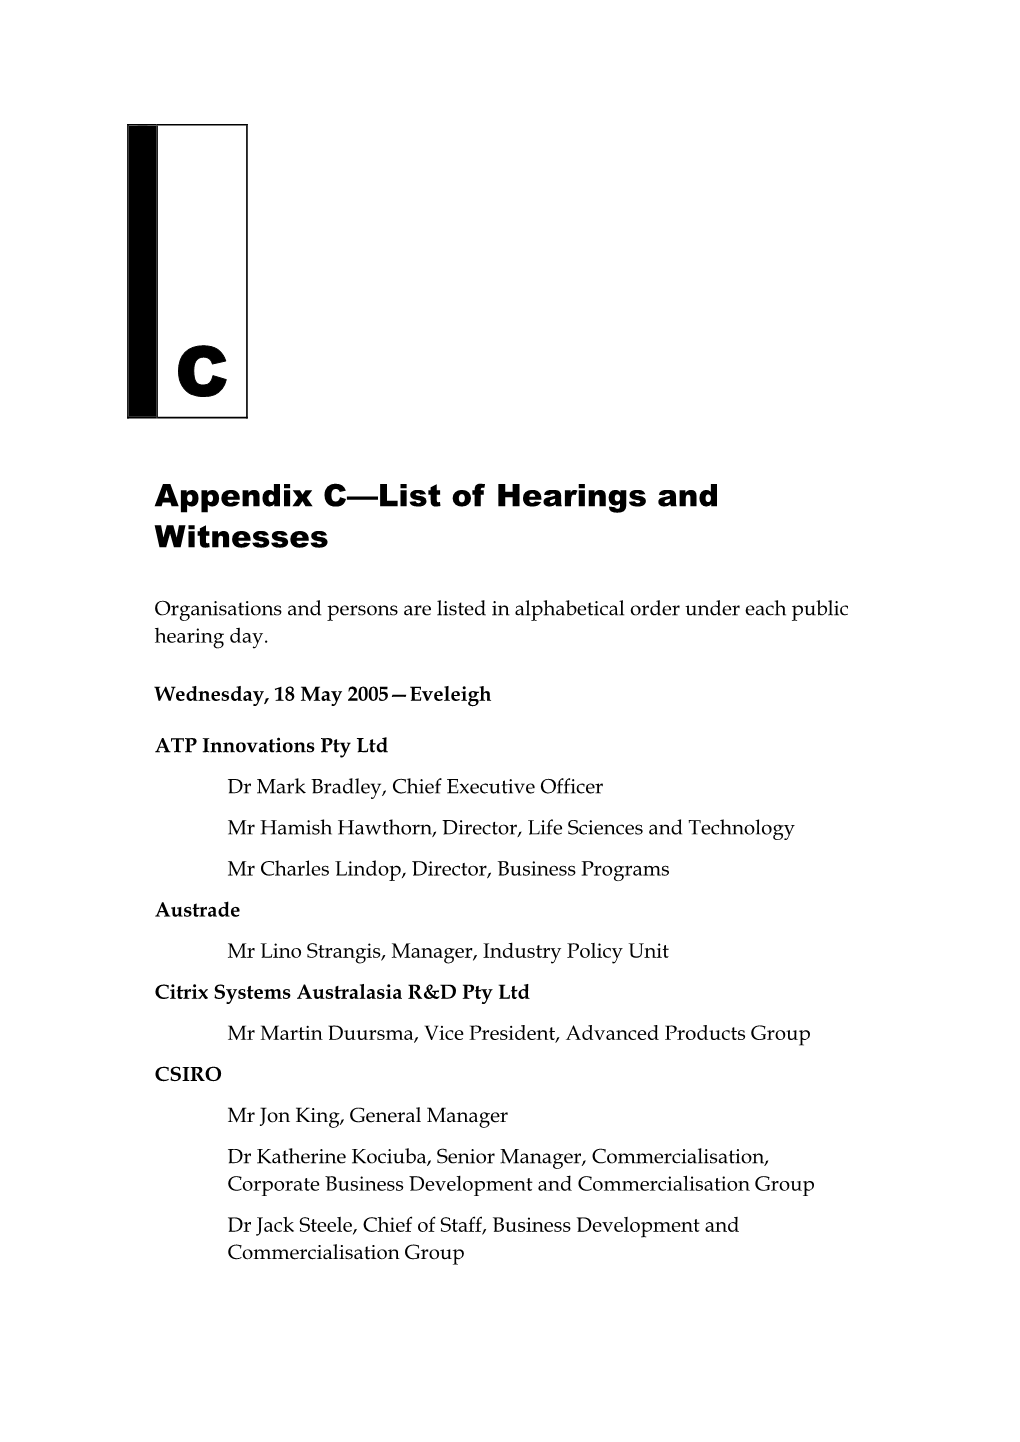 Appendix C: Hearings and Witnesses